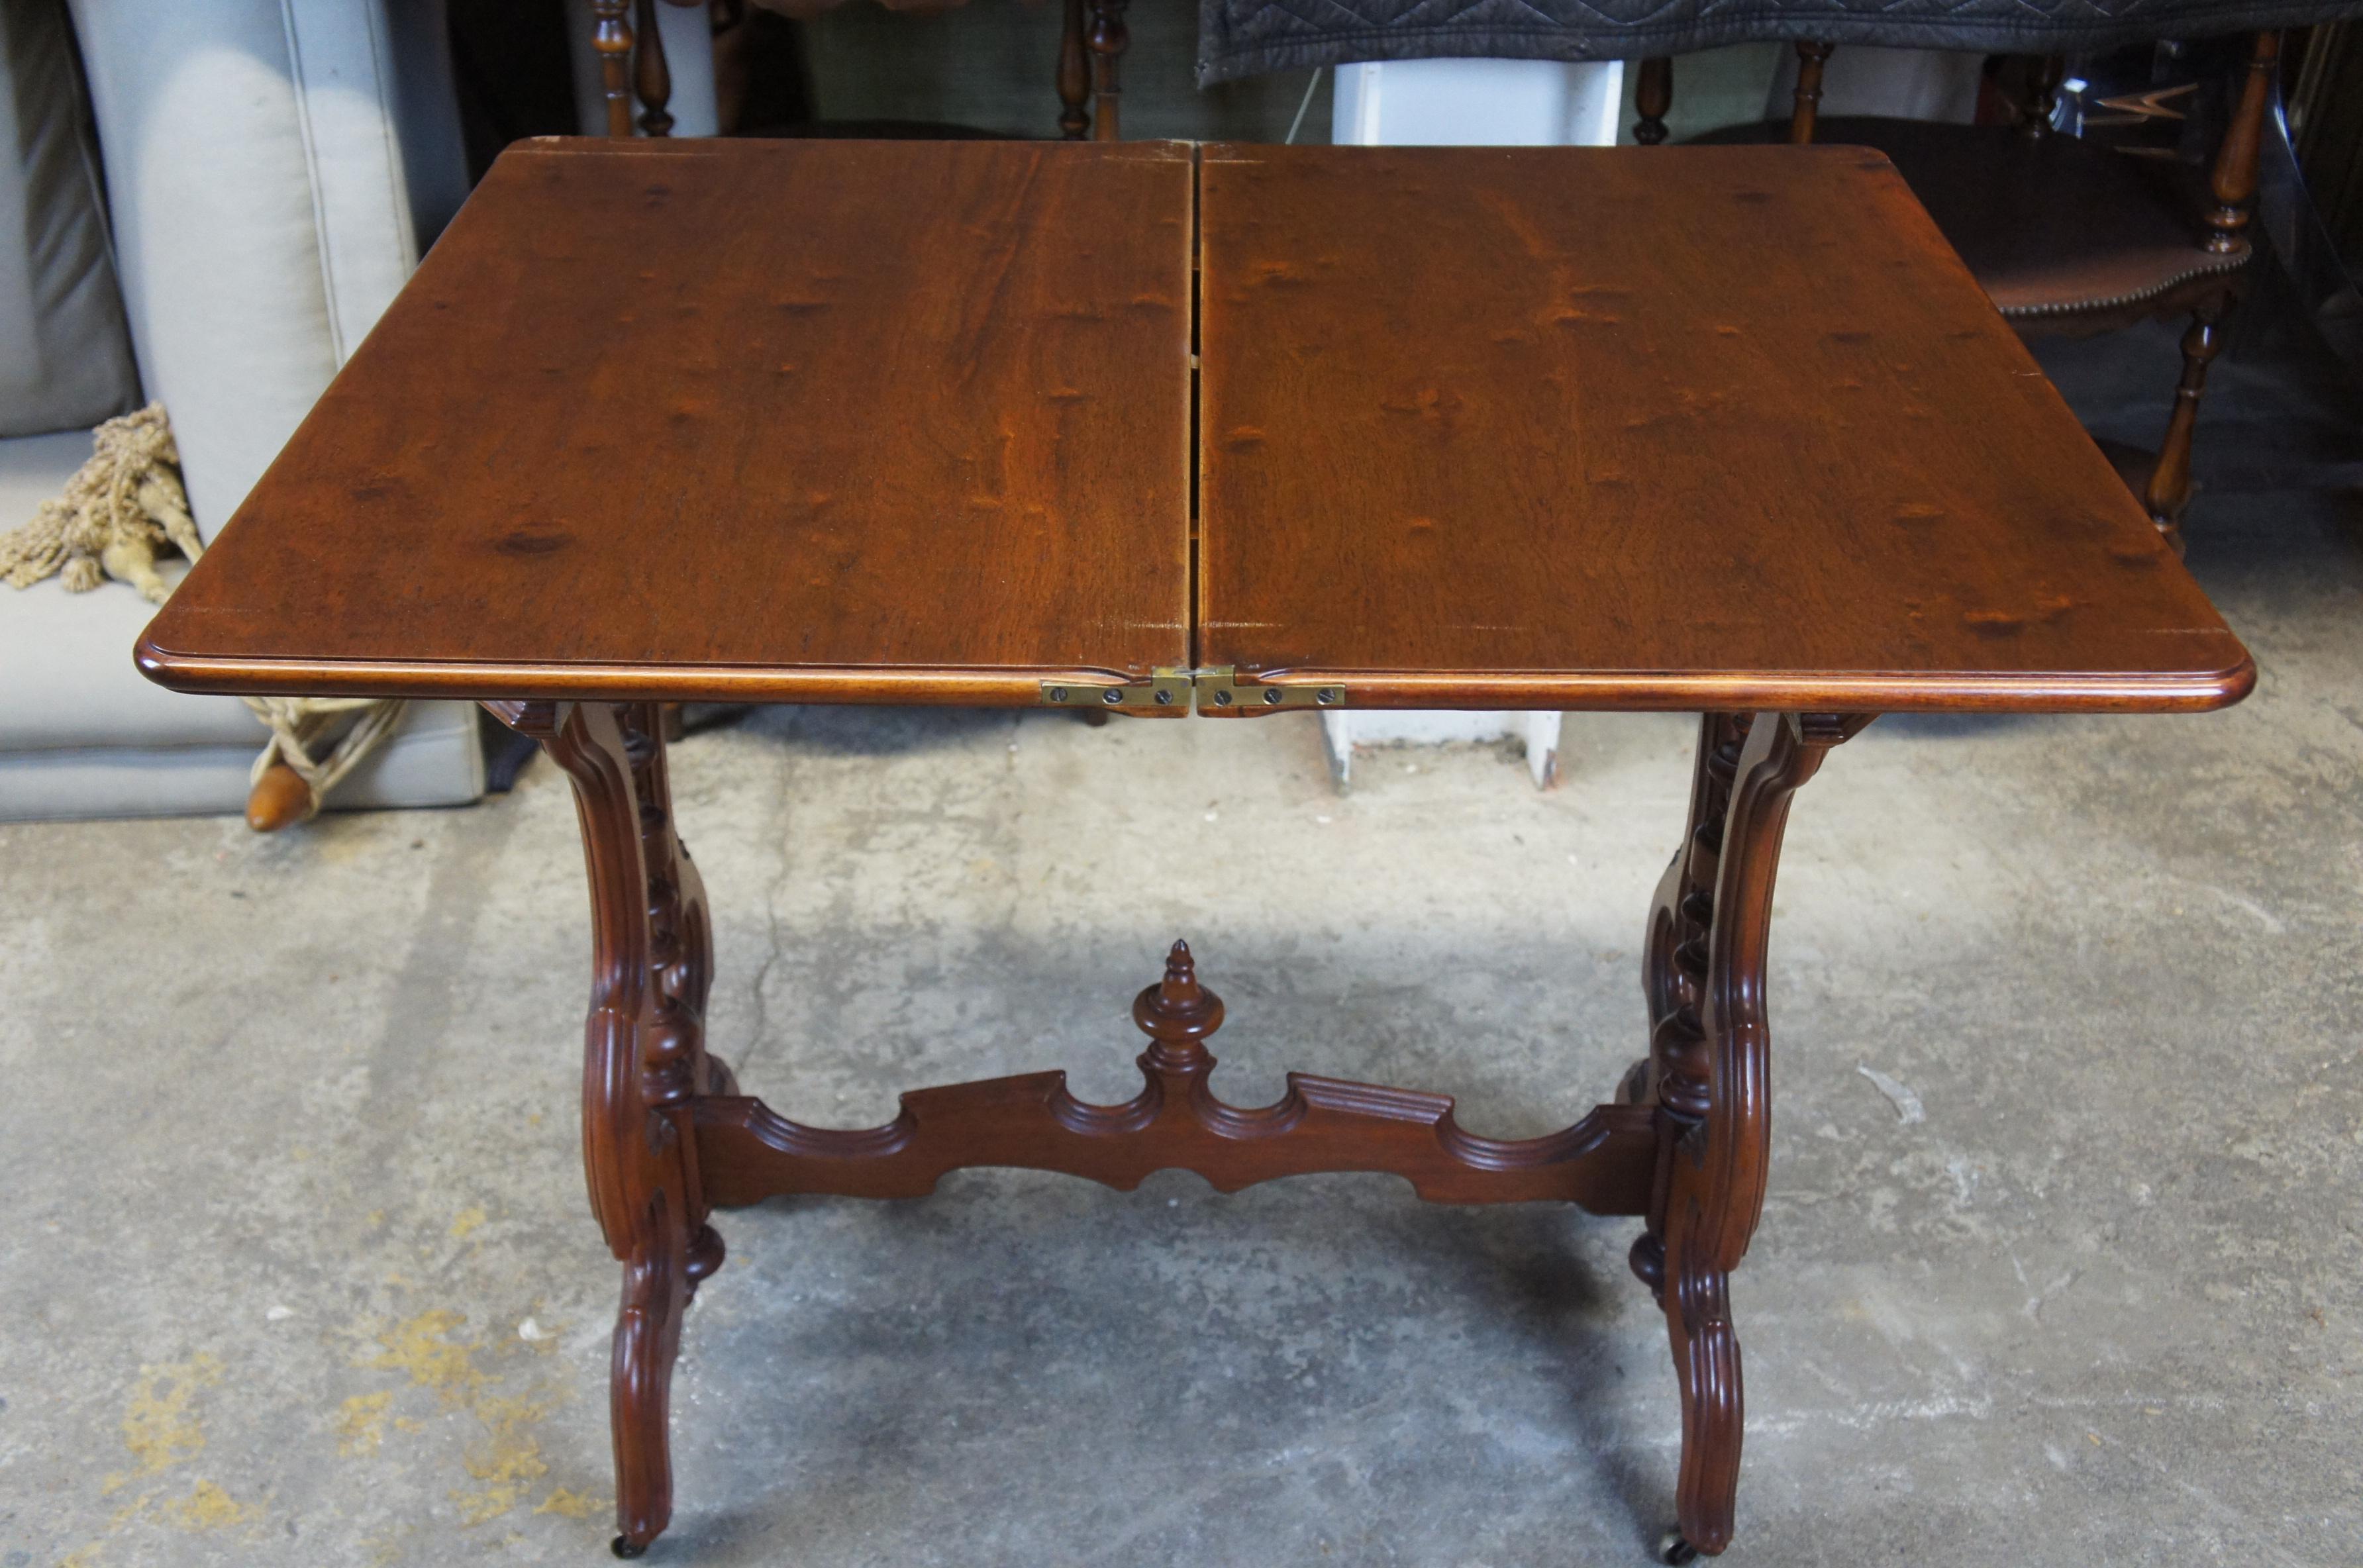 Late 19th Century Antique Victorian Walnut Game Table and Sewing Cabinet Eastlake Parlor